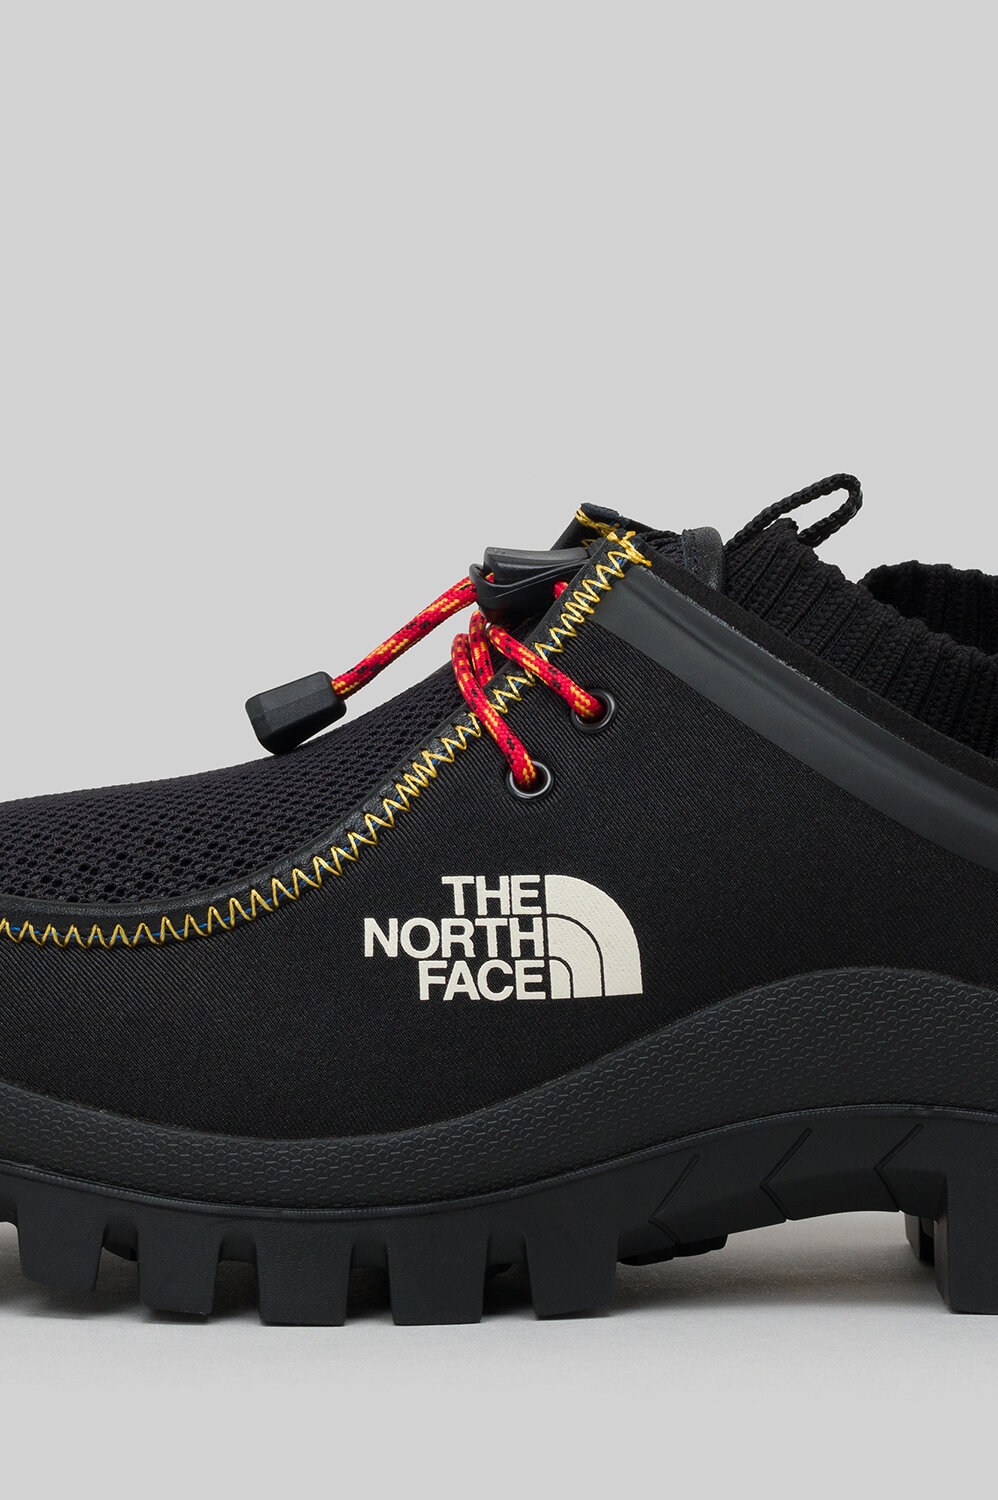 The North Face and Hender Scheme Return for a Leather-Infused 